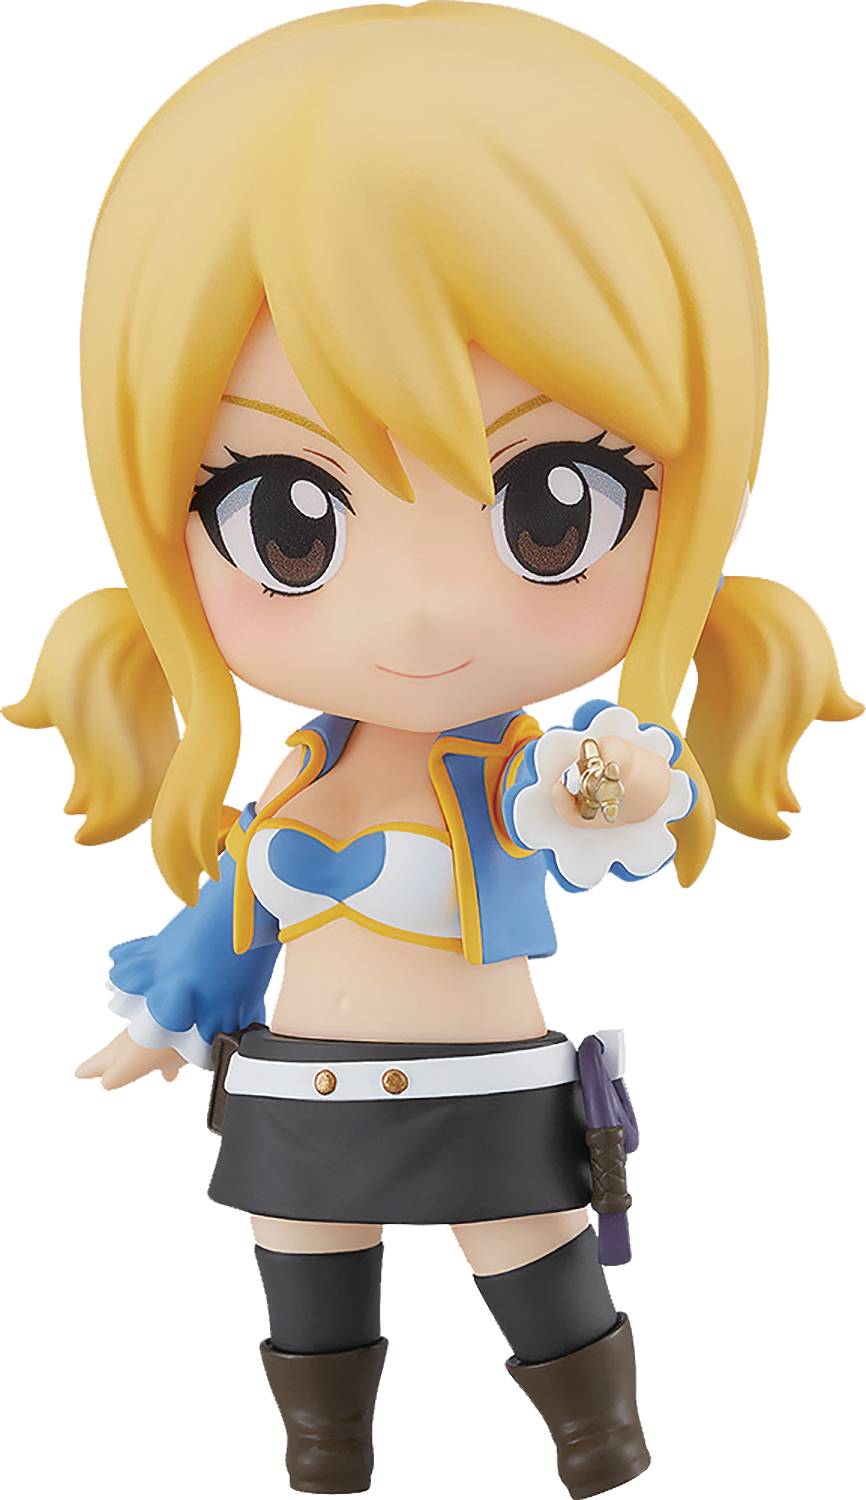 Fairy Tail Lucy And Anime Image  Lucy Heartfilia Transparent Background  HD Png Download  vhv